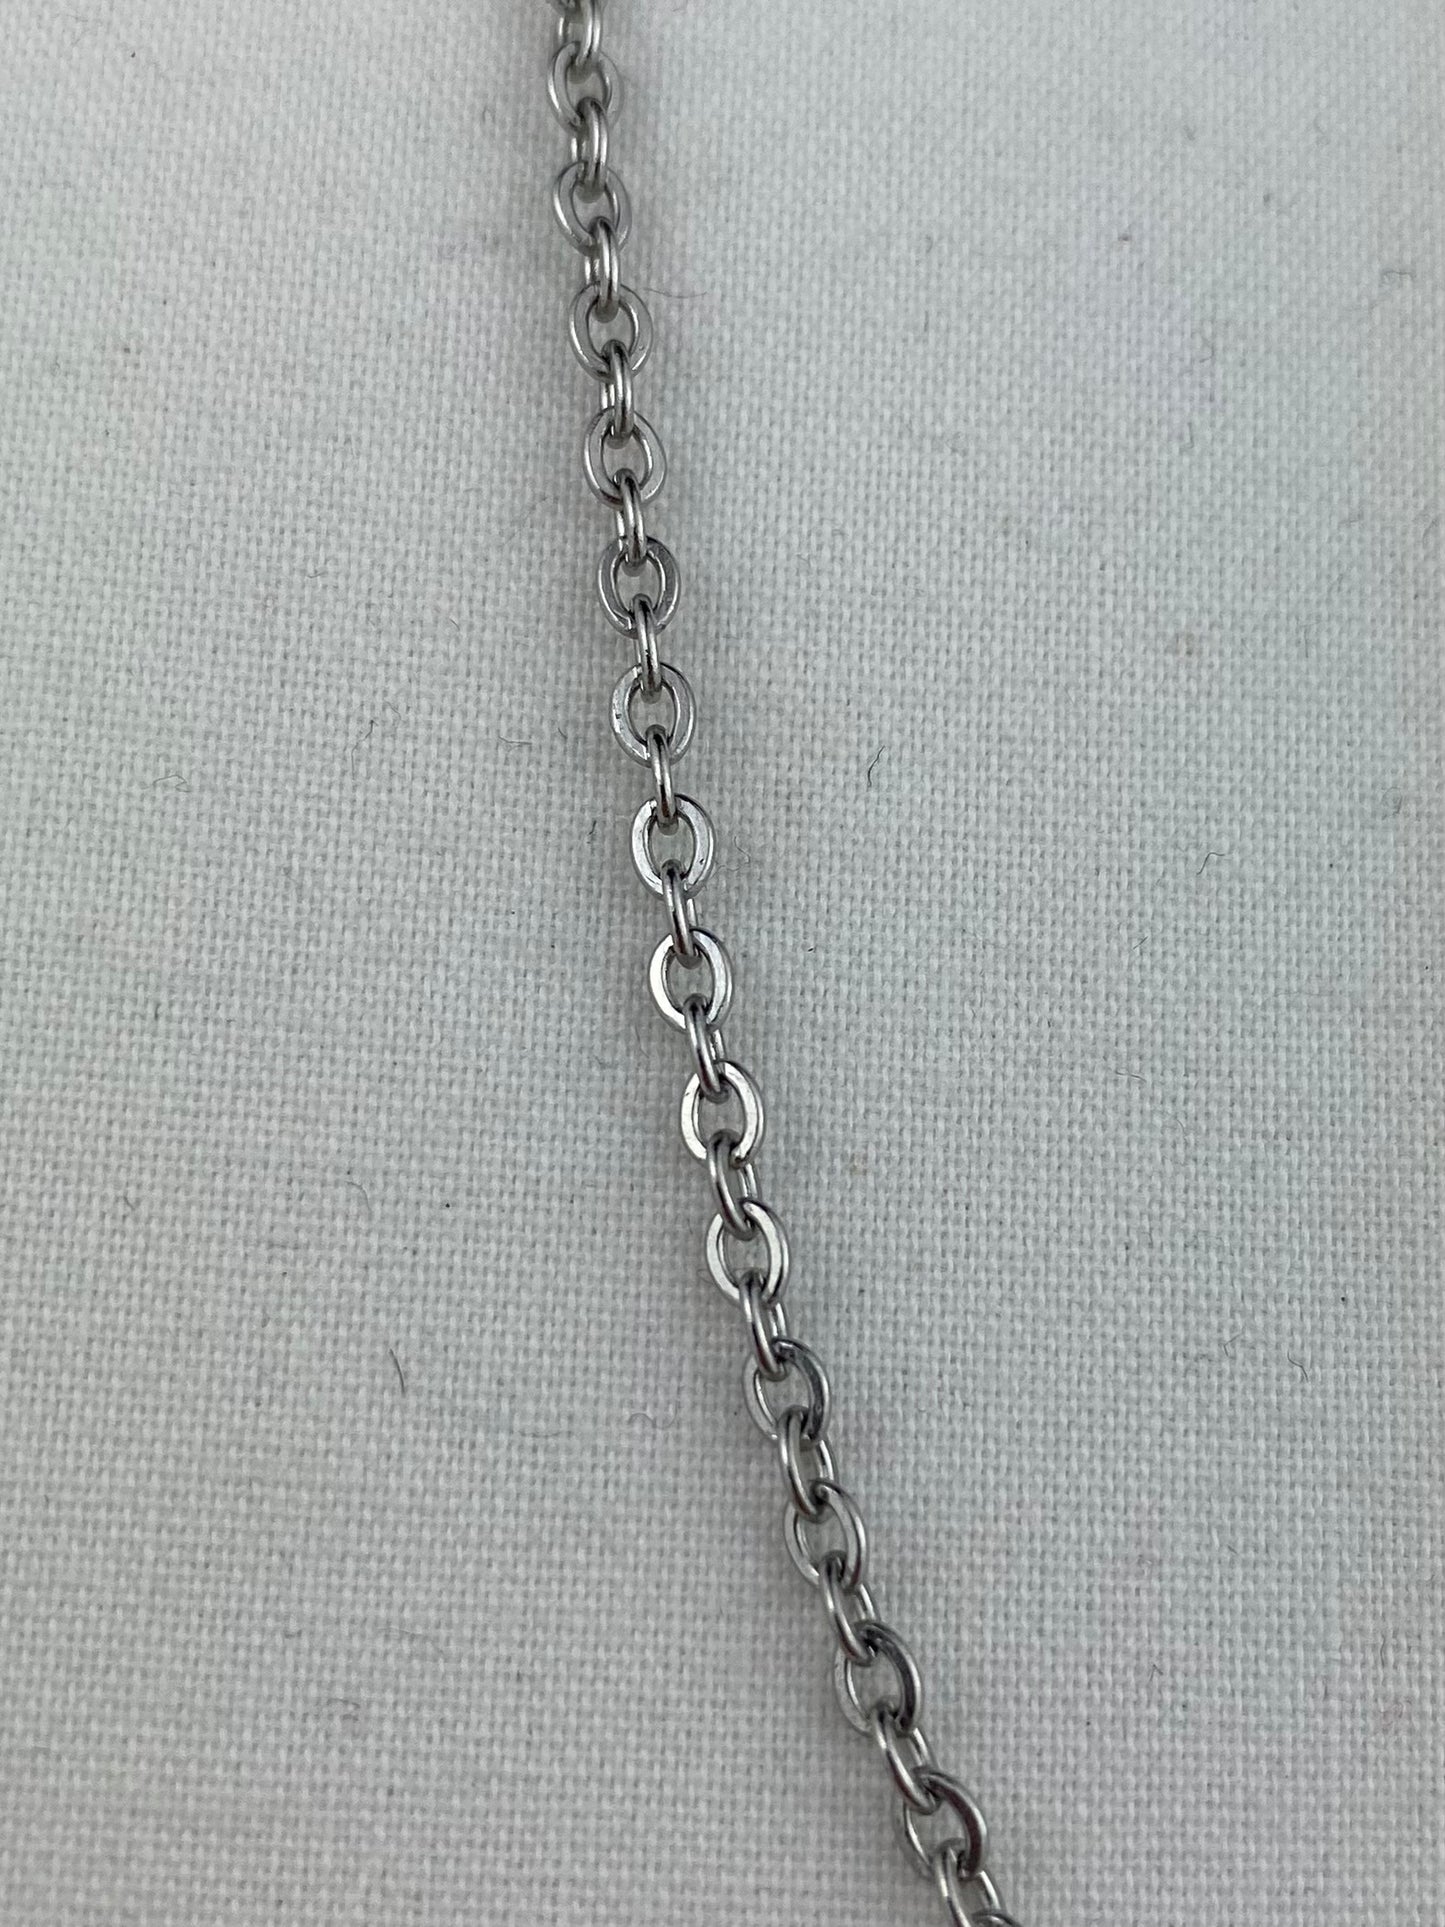 Fresh Necklace - Stainless Steel